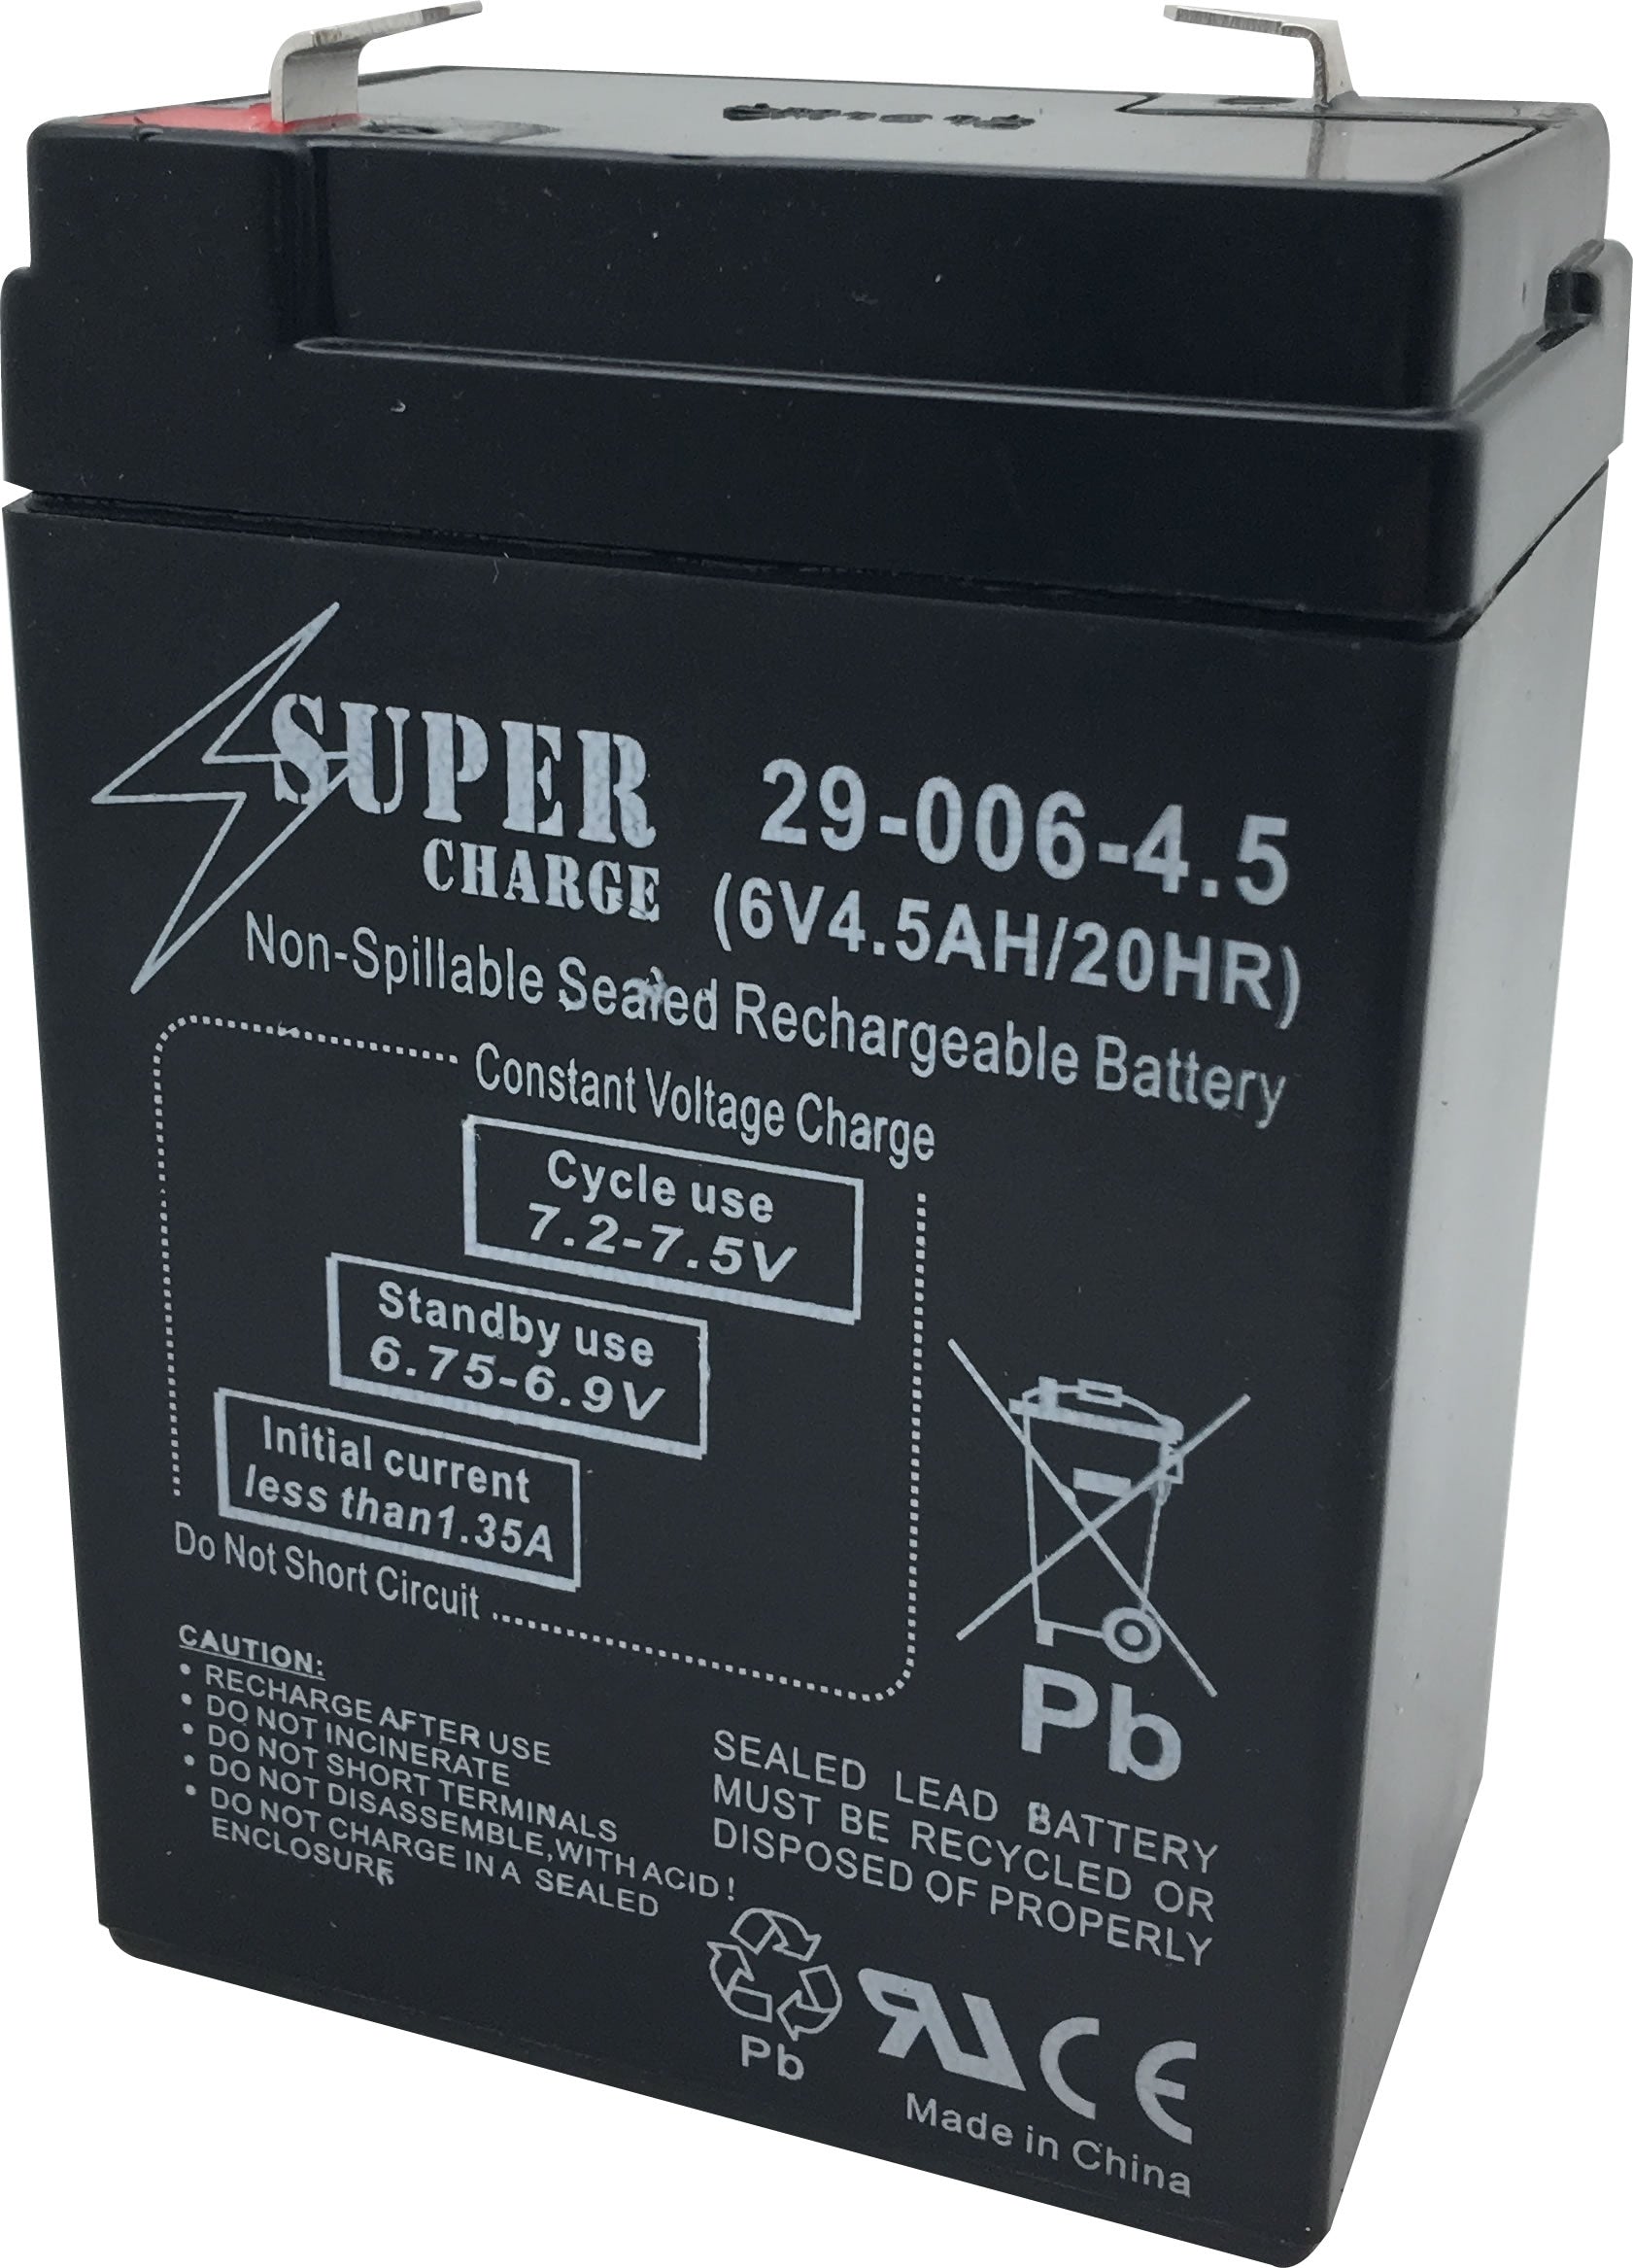 29-006-4.5 Rechargeable Battery 6V 4.5AH 20HR – AA Electronics